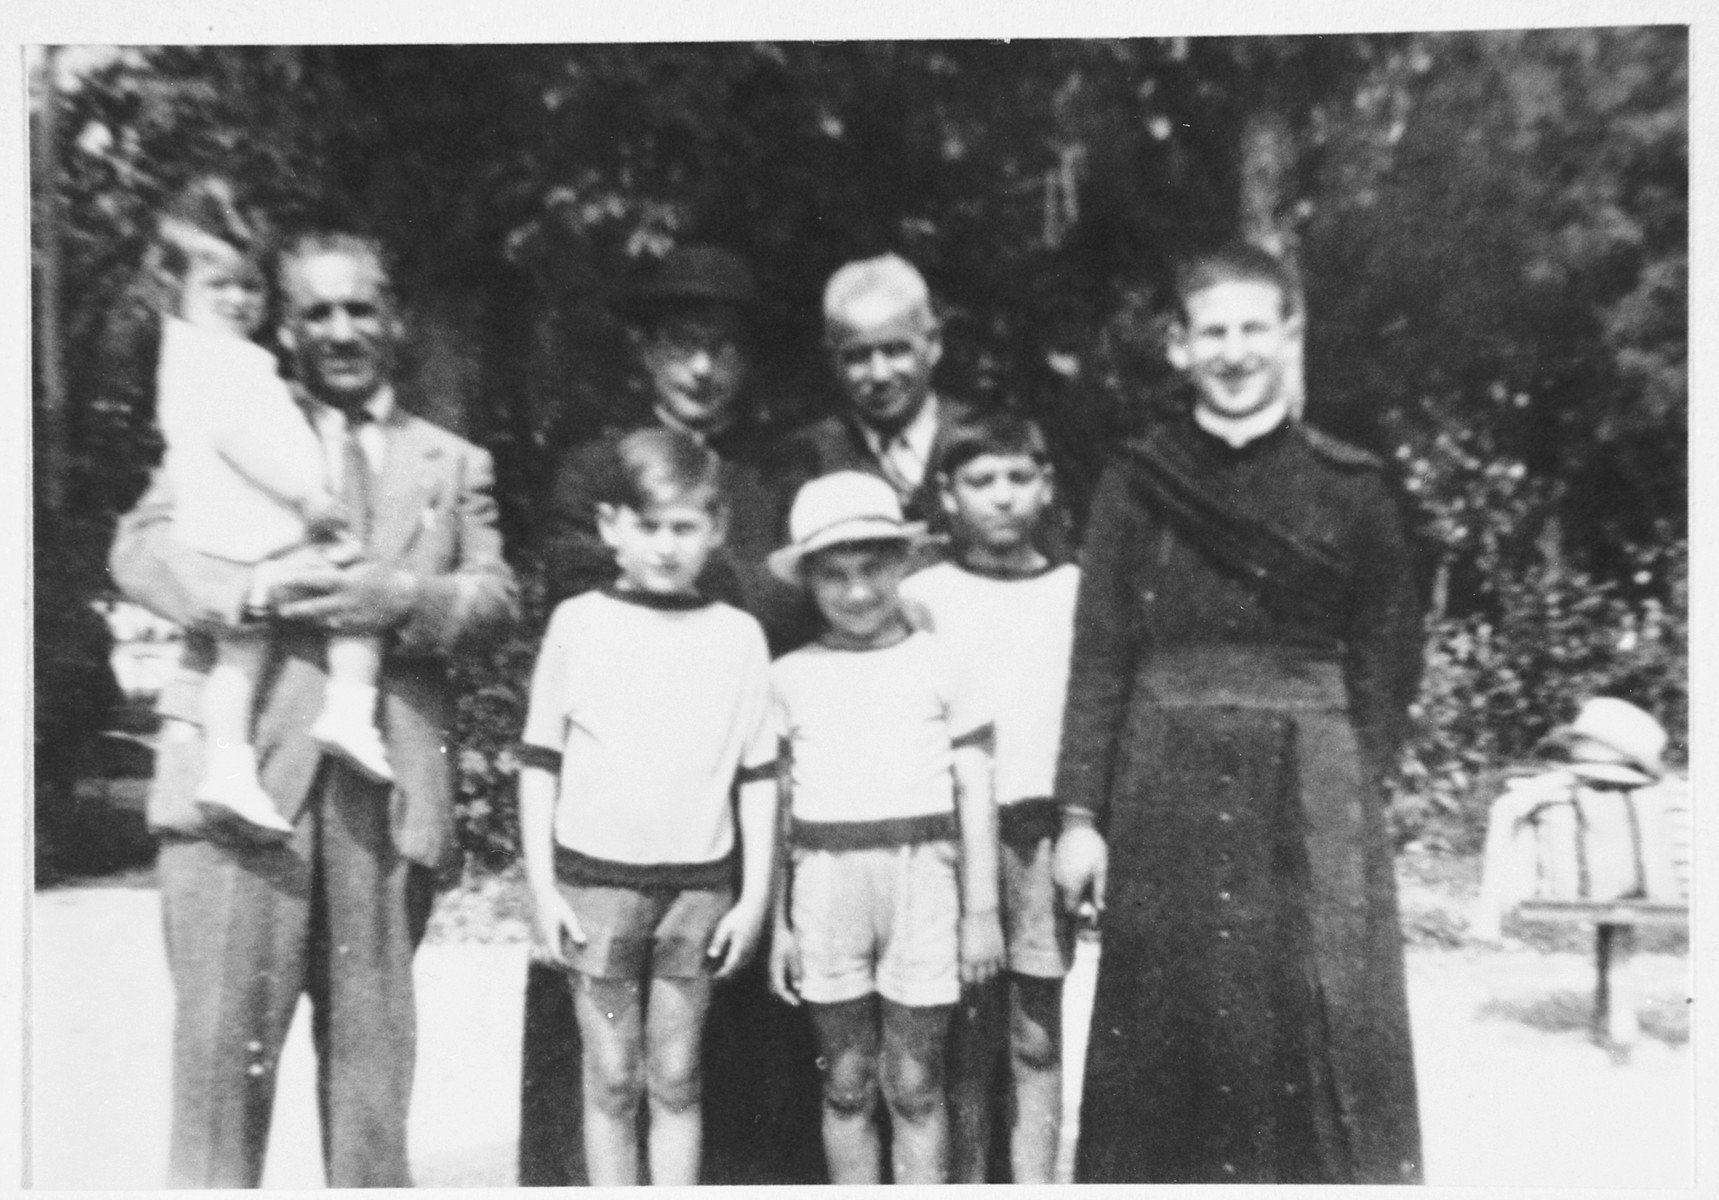 A Jewish family poses with a priest from the parish that hid them a few years later.

From left to right are Nathan Orvieto in the arms of his father, Enrico Orvieto (donor's uncle), Emanuele Pacifici, Guiliano Orvieto, Gualtiero Orvieto, and the priest whose name is unknown.  Behind them is Don Gaetano Tantalo and Mario Pacifici (the donor's paternal grandfather).

Don Gaetano Tantalo hid all nine members of the Ovieto family for approximately nine months.  He passed away a few months after the end of the war but in 1978 was recognized as Righteous Among the Nations.